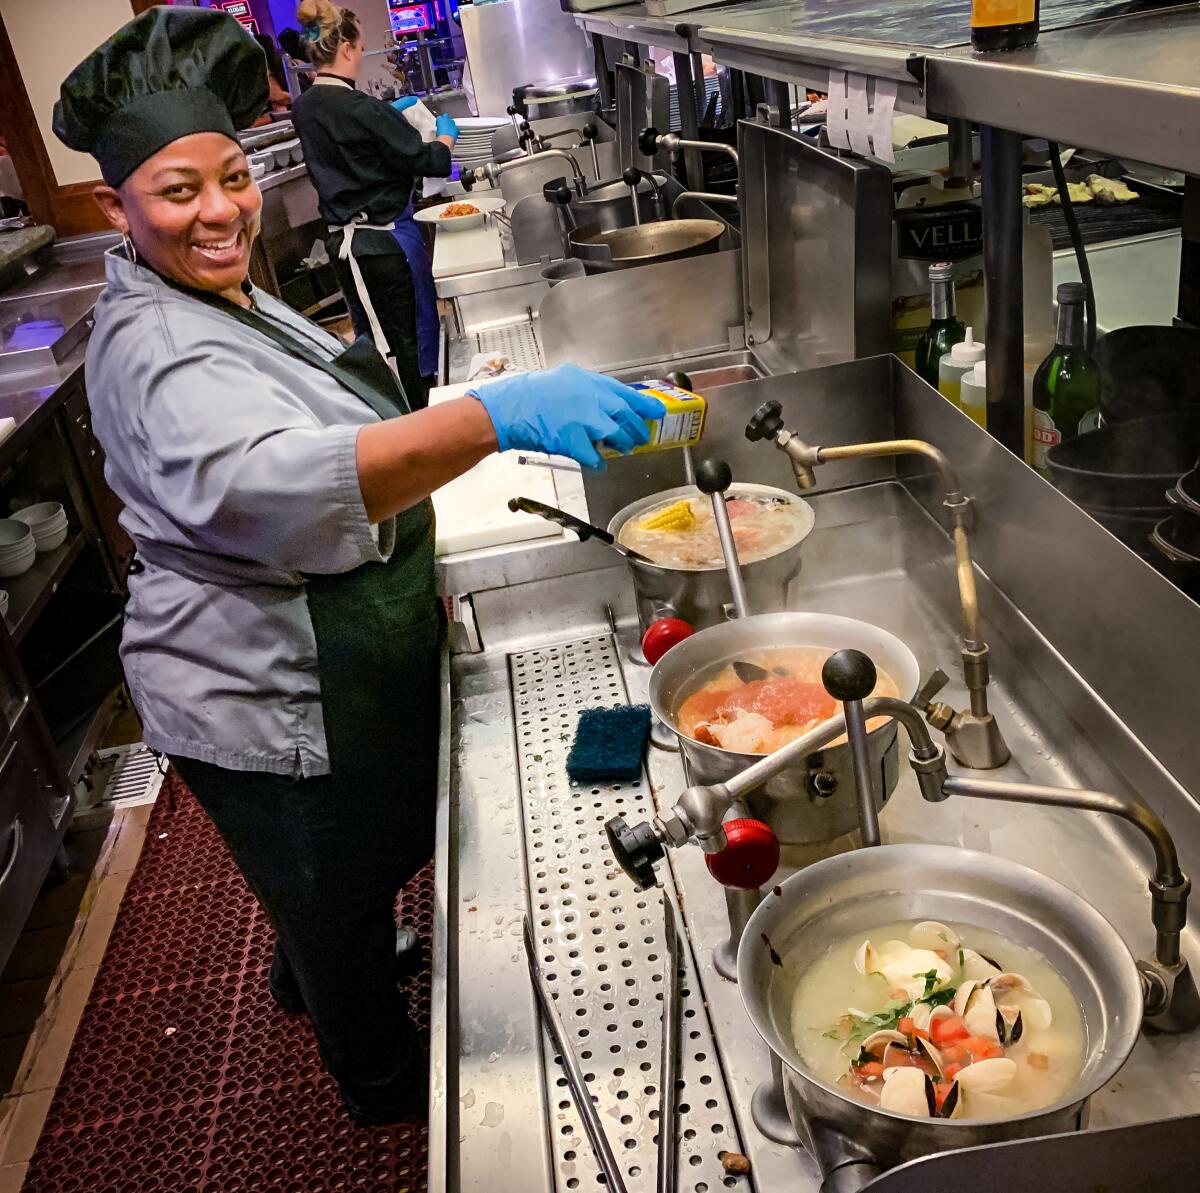 Jacqueline McMillion has been cooking pan roasts at the Oyster Bar at Harrah's Las Vegas since the restaurant opened 13 years ago.